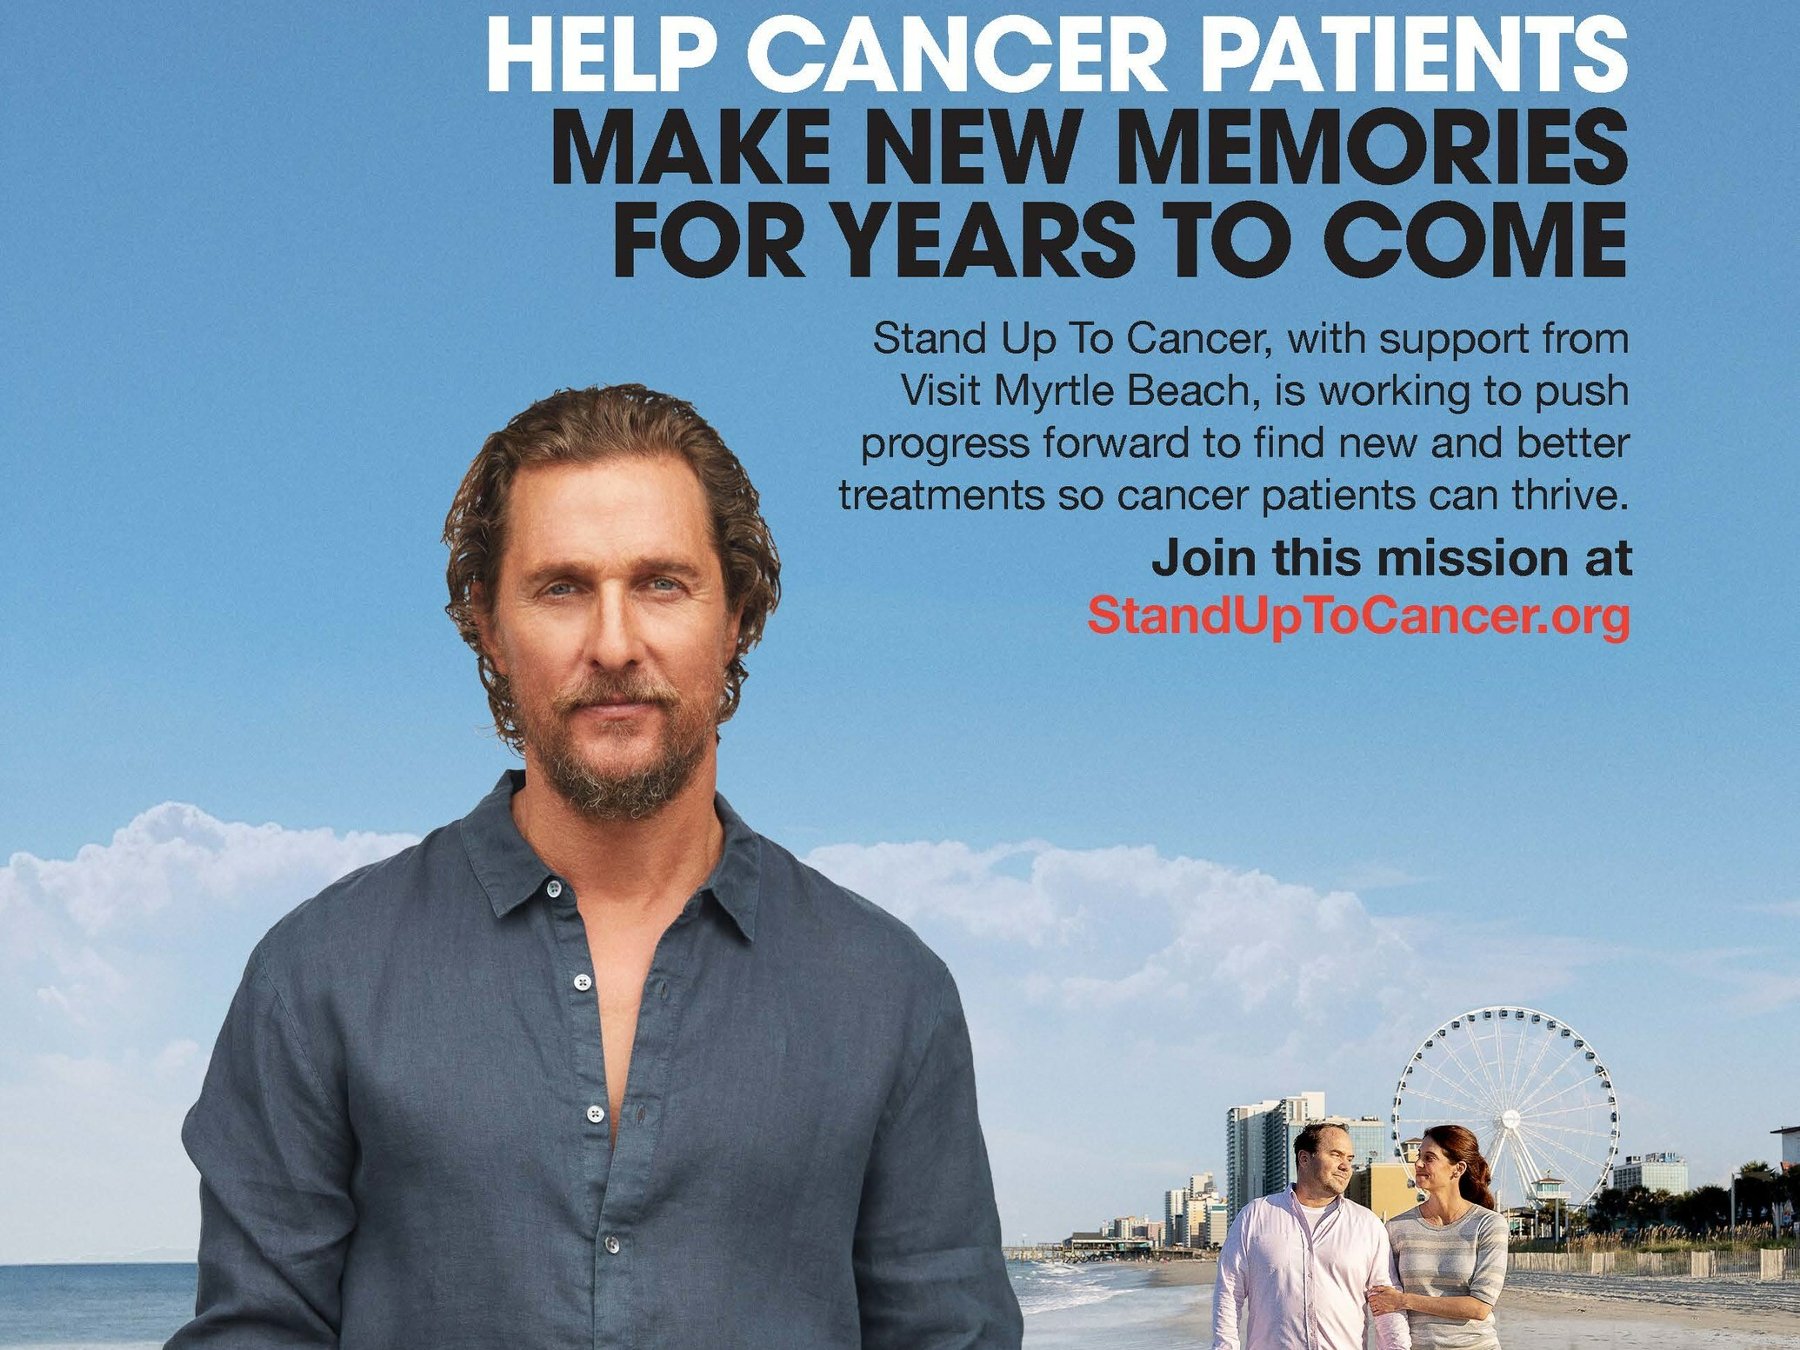 Matthew McConaughey in the Stand Up To Cancer PSA